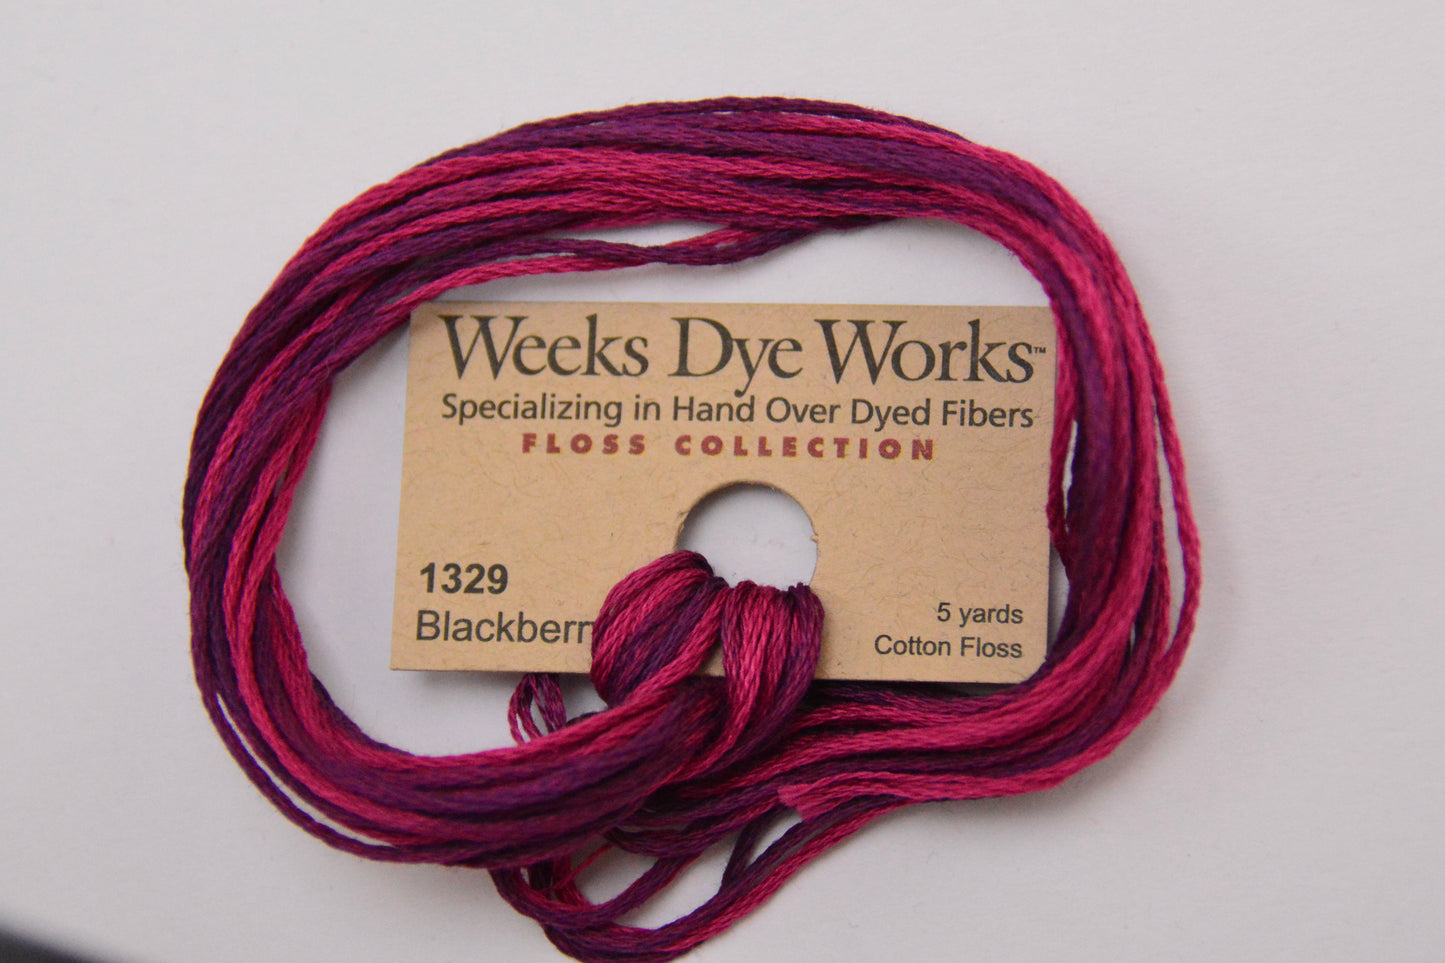 Blackberry 1329 Weeks Dye Works 6-Strand Hand-Dyed Embroidery Floss